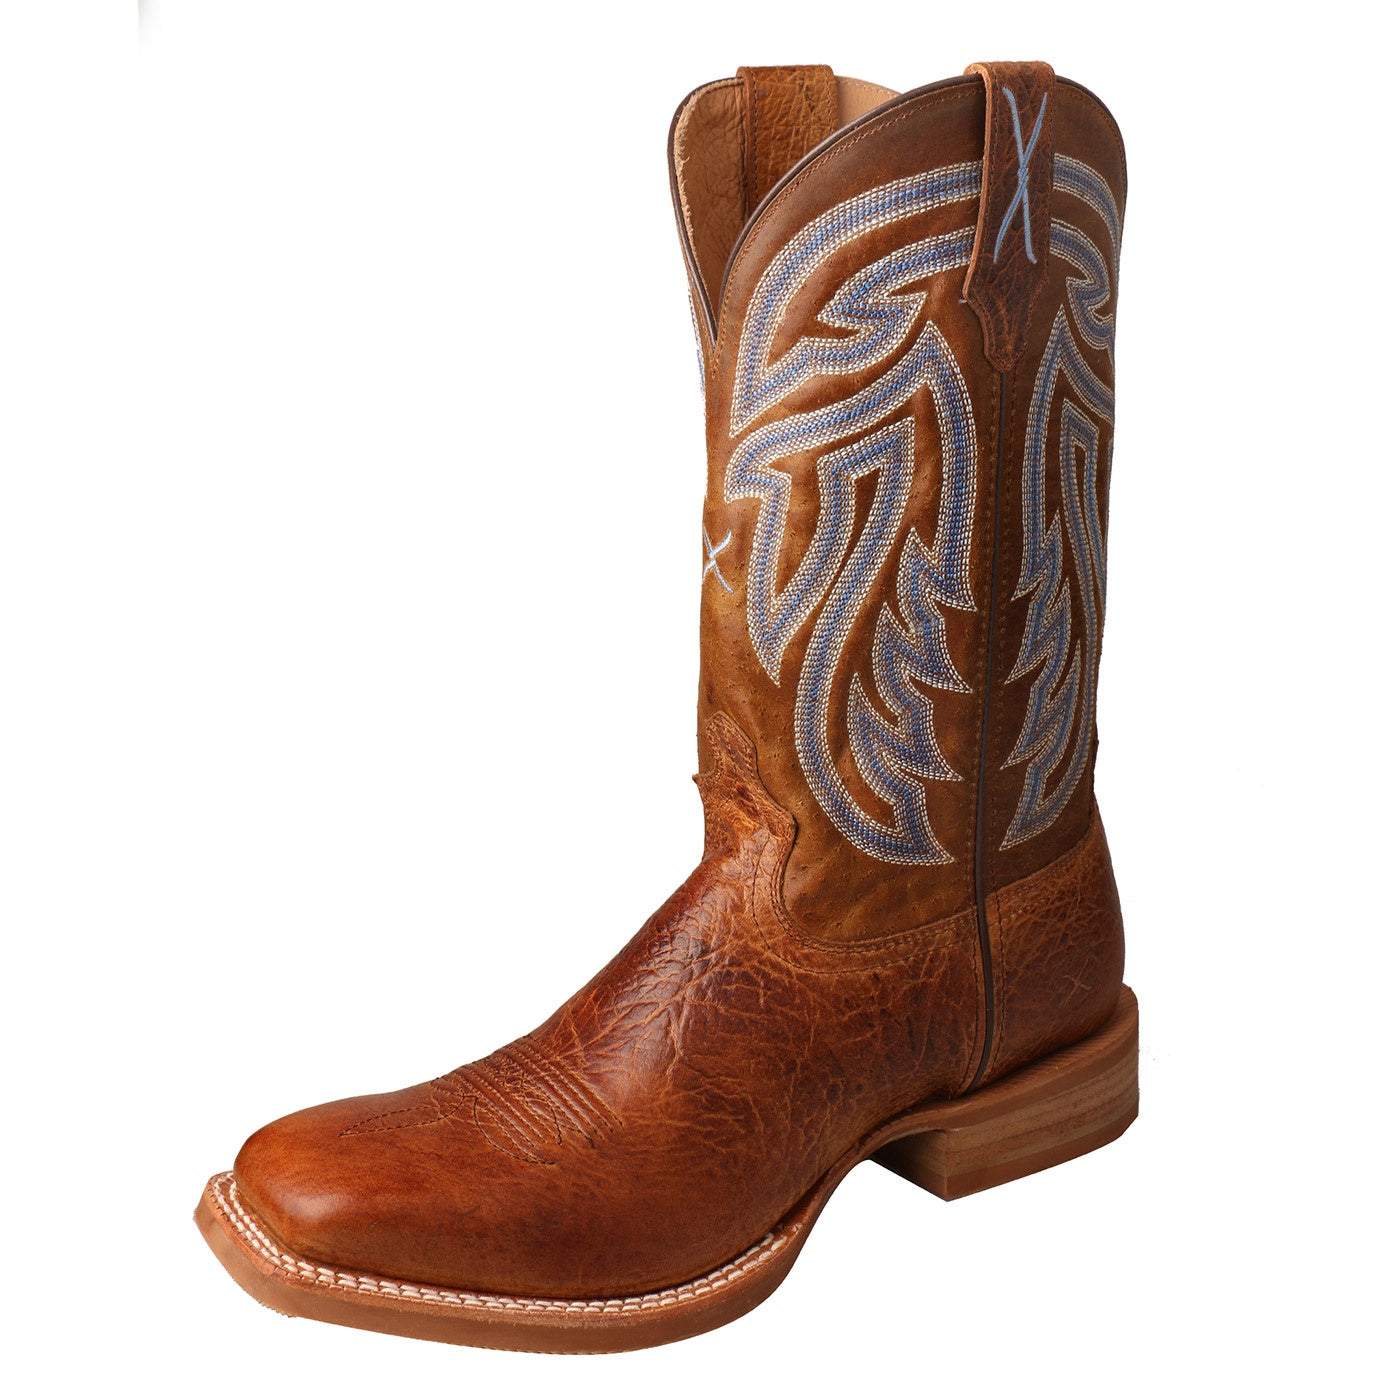 MRA0001 Twisted-X Men's RANCHER WS Boots